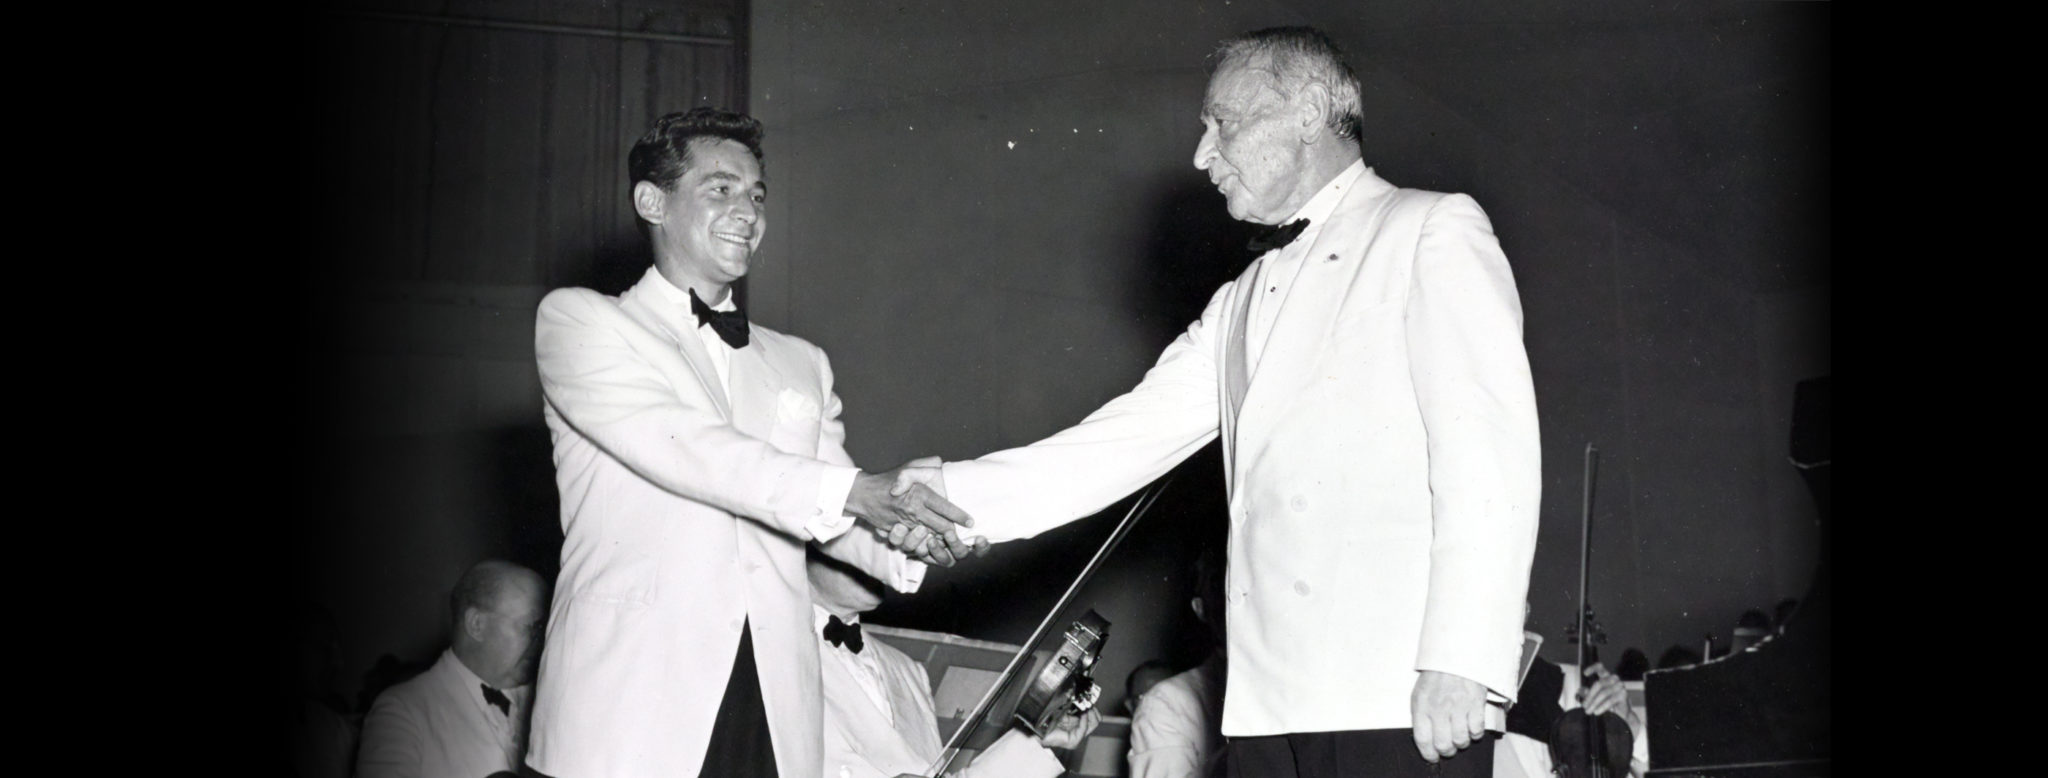 Bernstein with conductor Serge Koussevitzky after performance of The Age of Anxiety, symphony No. 2 at Tanglewood, August 11, 1949. (Credit: Howard S. Babbit, via Library of Congress, Music Division)